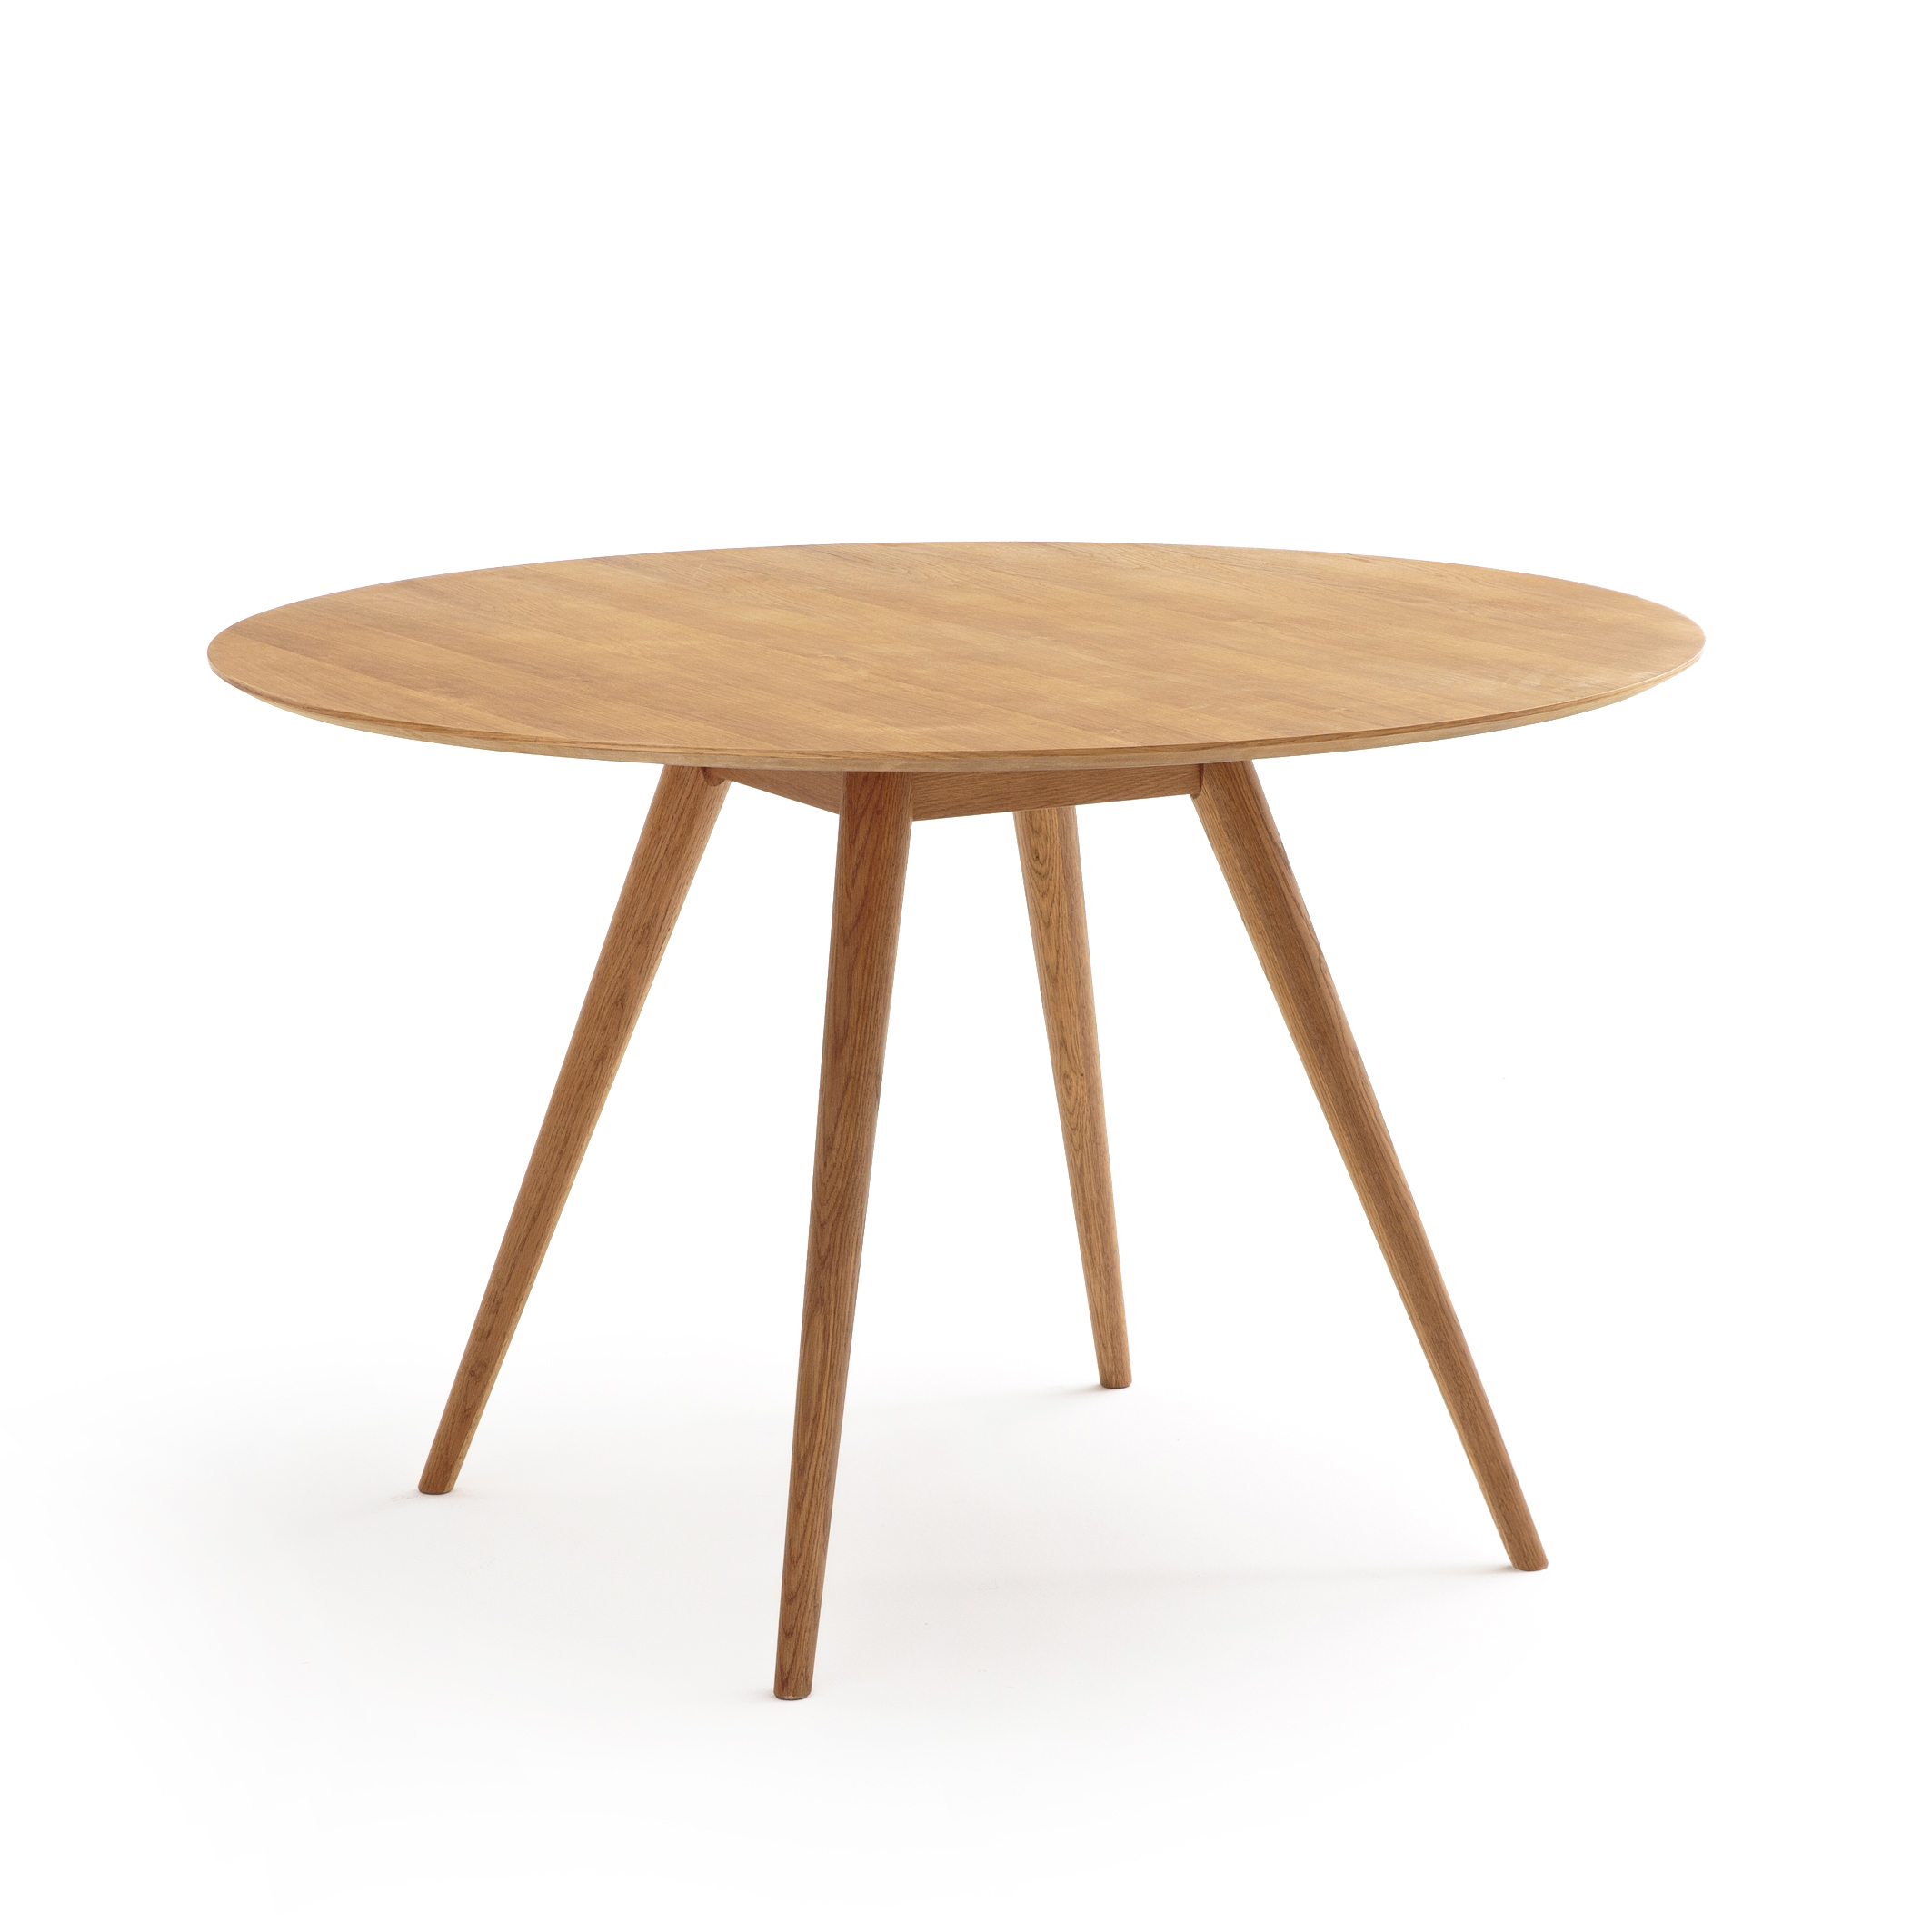 Quilda Round Dining Table (Seats 4-6)